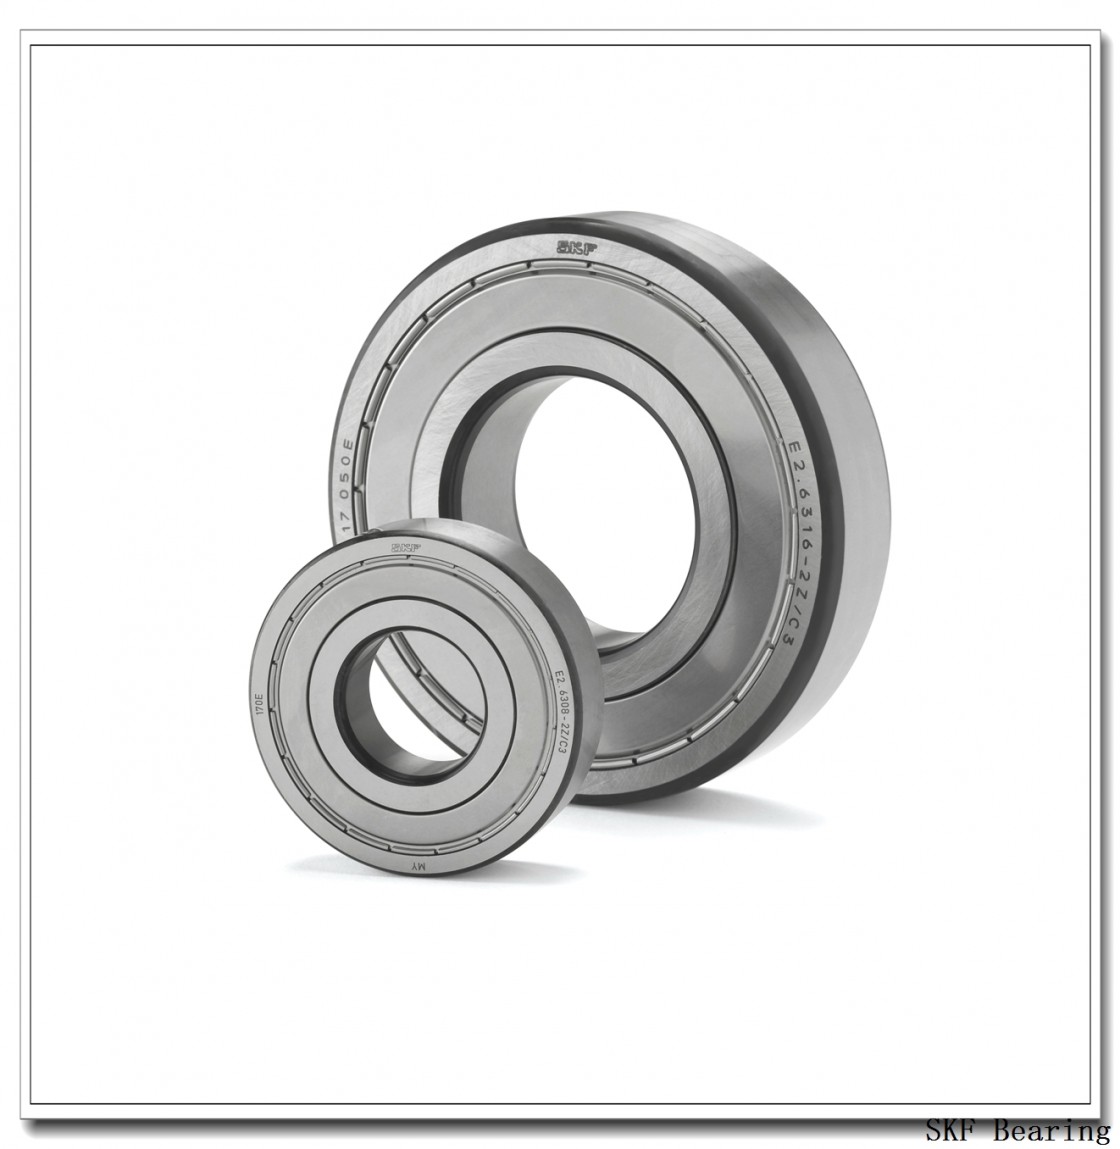 SKF 22334 CC/W33 tapered roller bearings